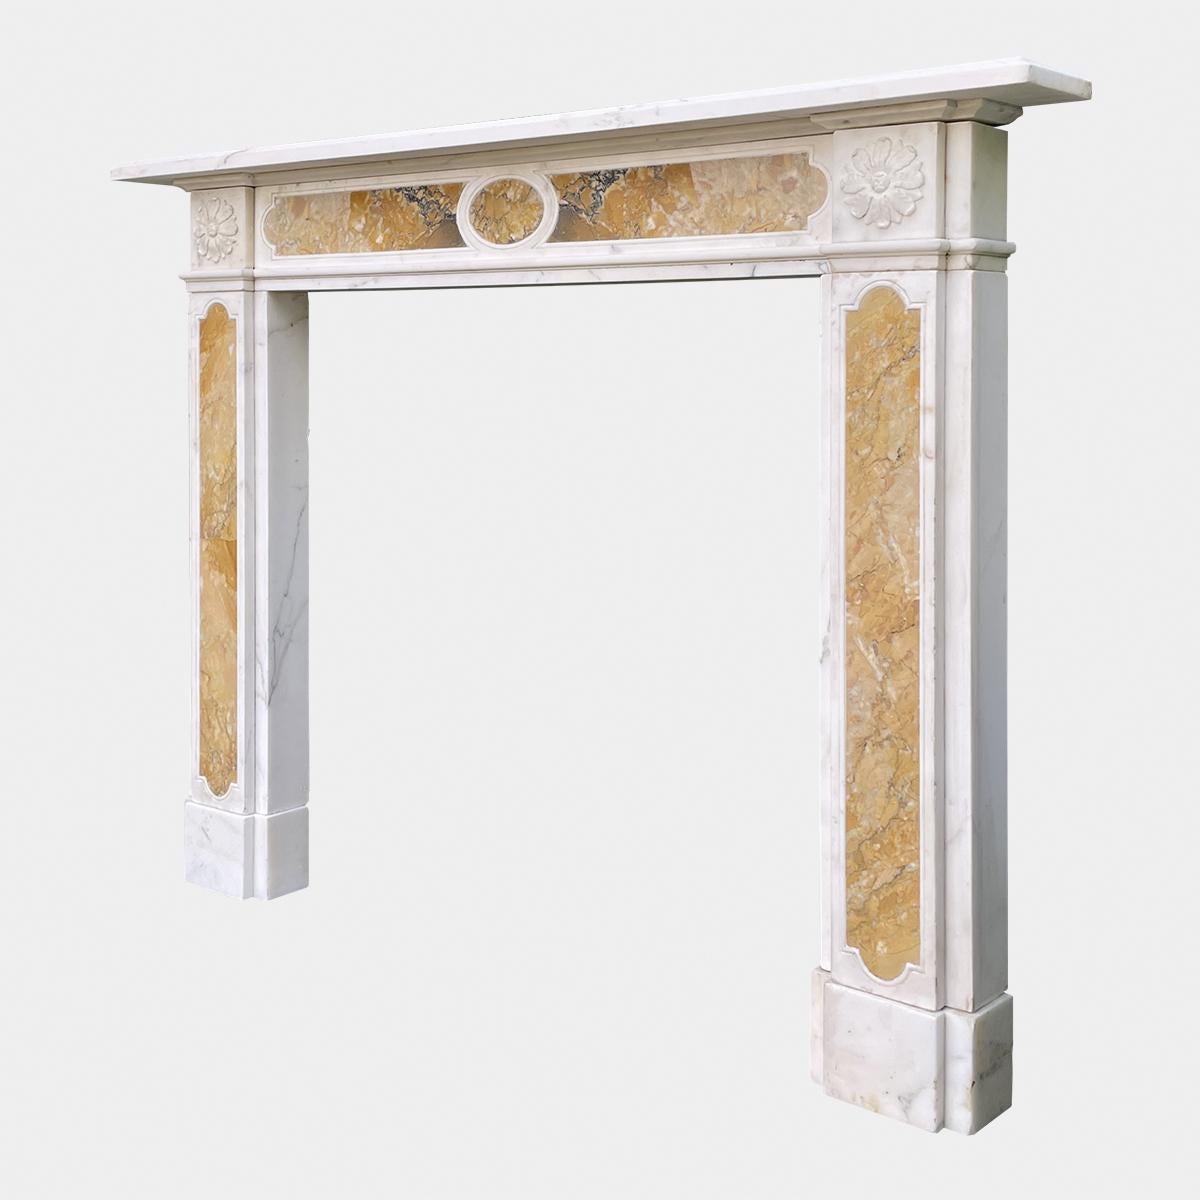 A Regency style fireplace from the mid 19th century executed in Italian Statuary white and Siena marbles. The jambs with inset Siena panels supported on foot blocks, terminating with carved rosette end blocks. The conforming frieze with carved